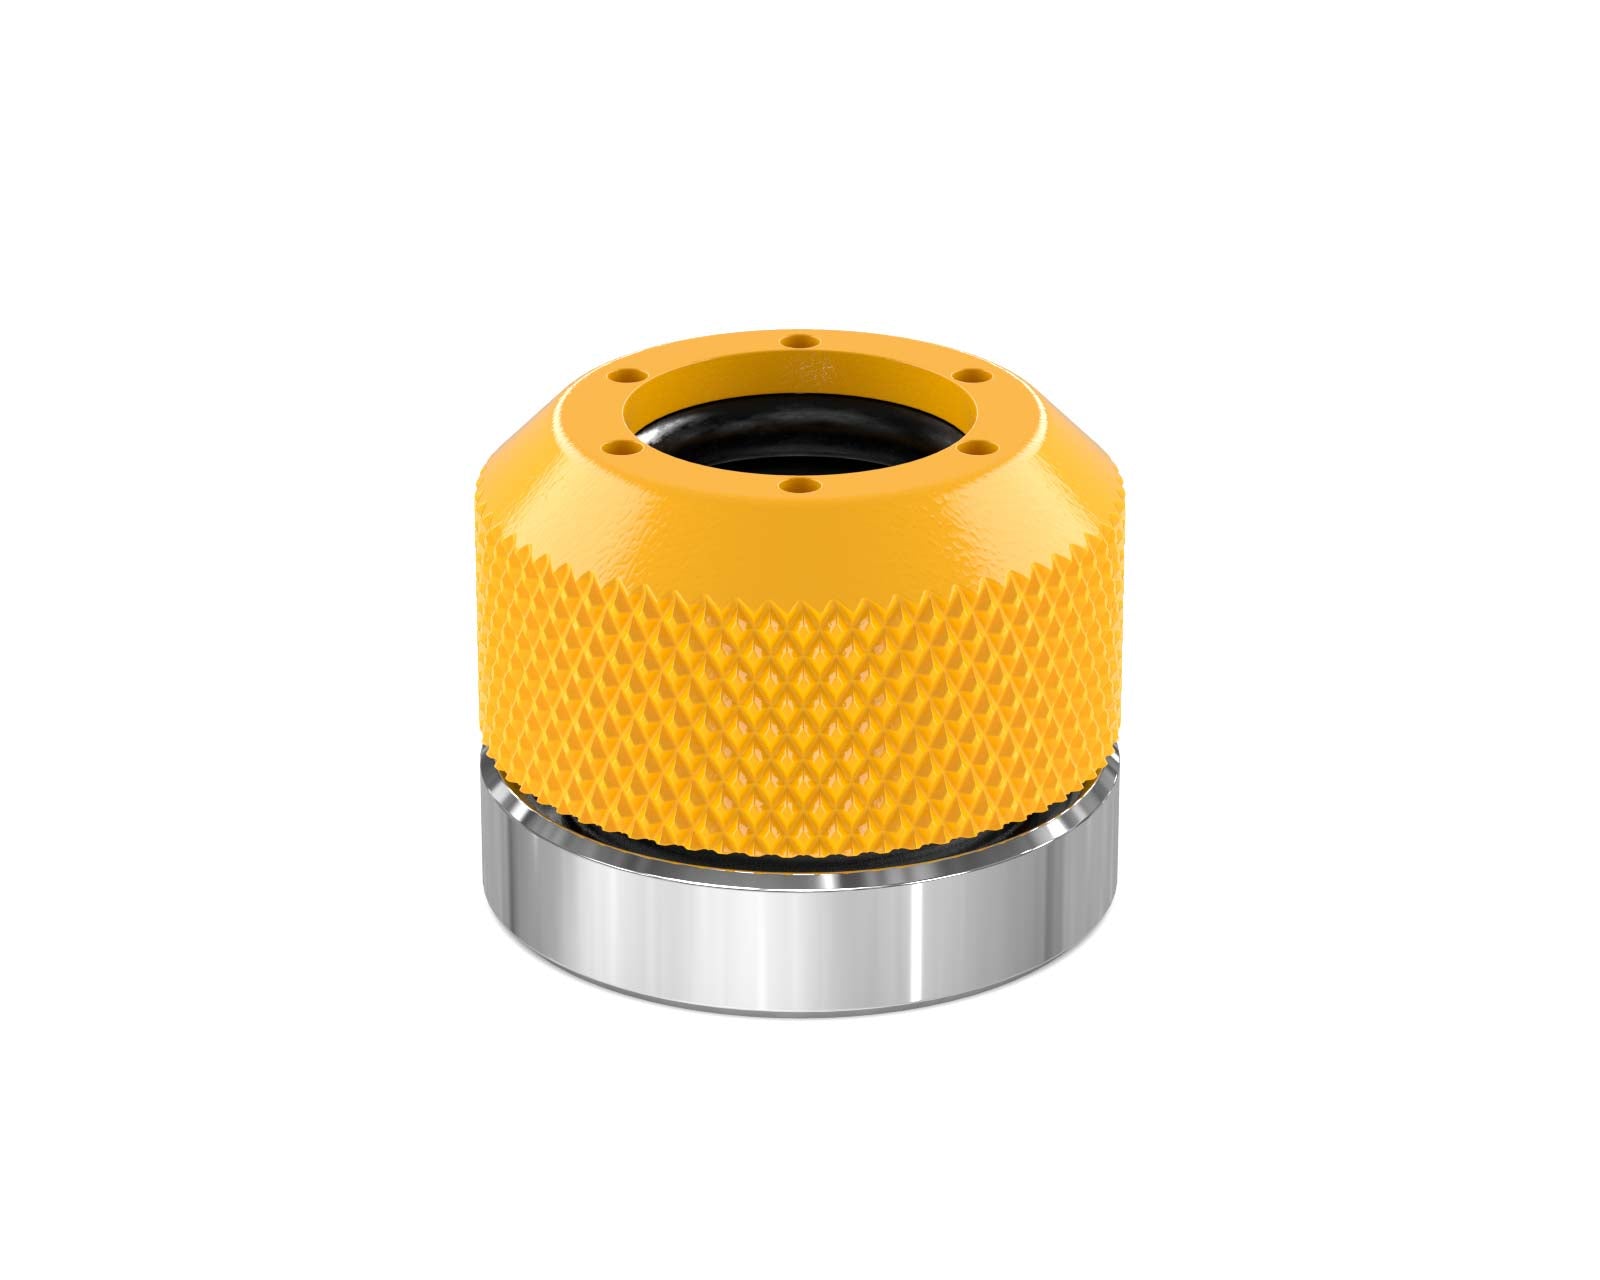 PrimoChill 1/2in. Rigid RevolverSX Series Coupler G 1/4 Fitting - PrimoChill - KEEPING IT COOL Yellow